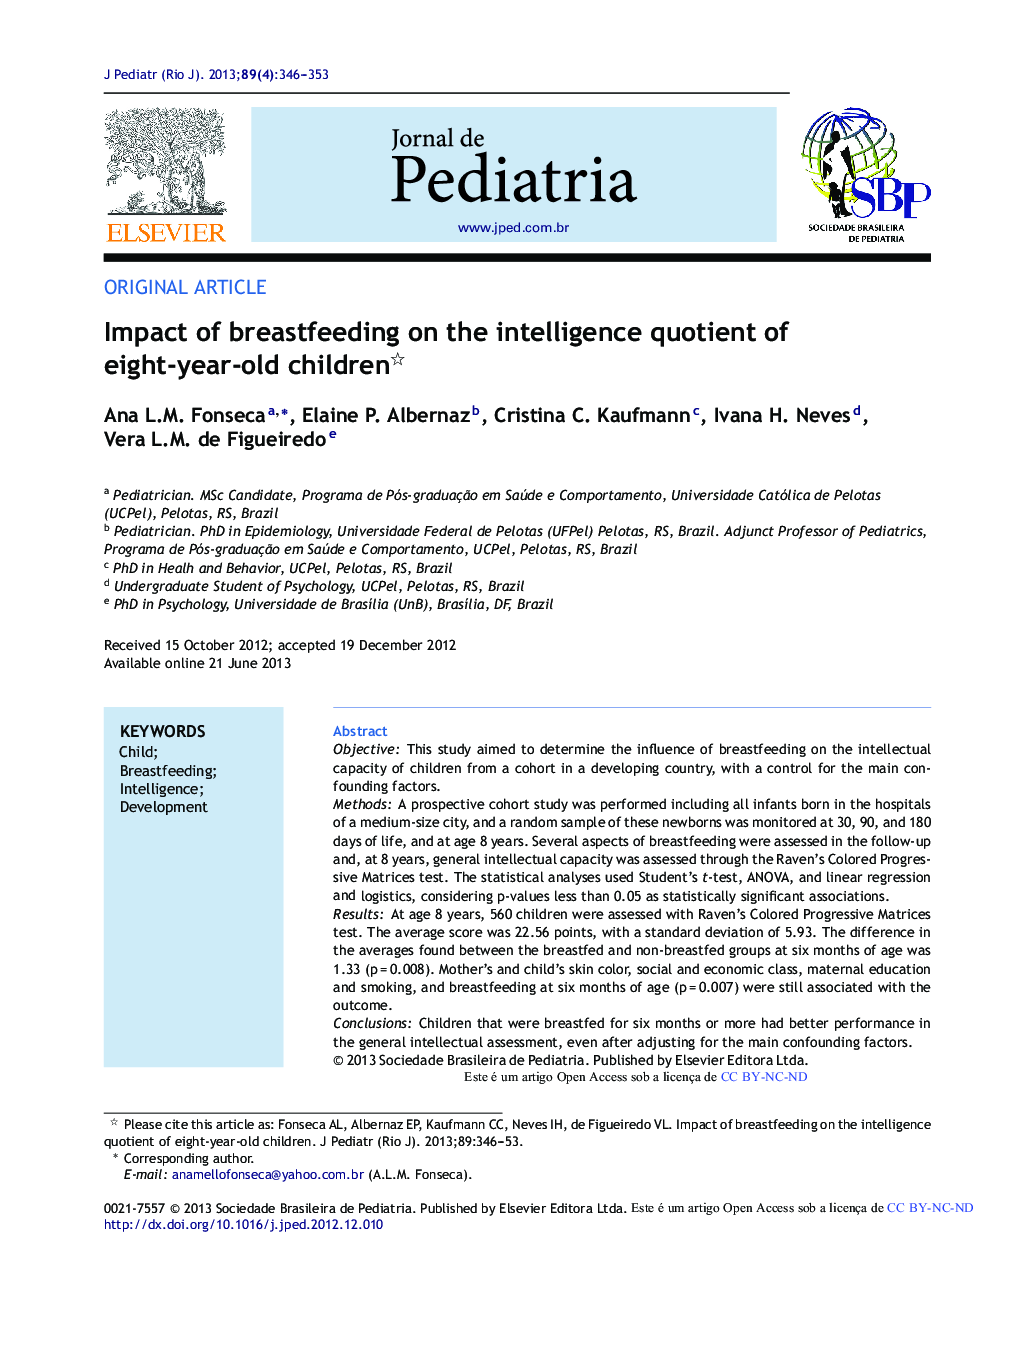 Impact of breastfeeding on the intelligence quotient of eight-year-old children 